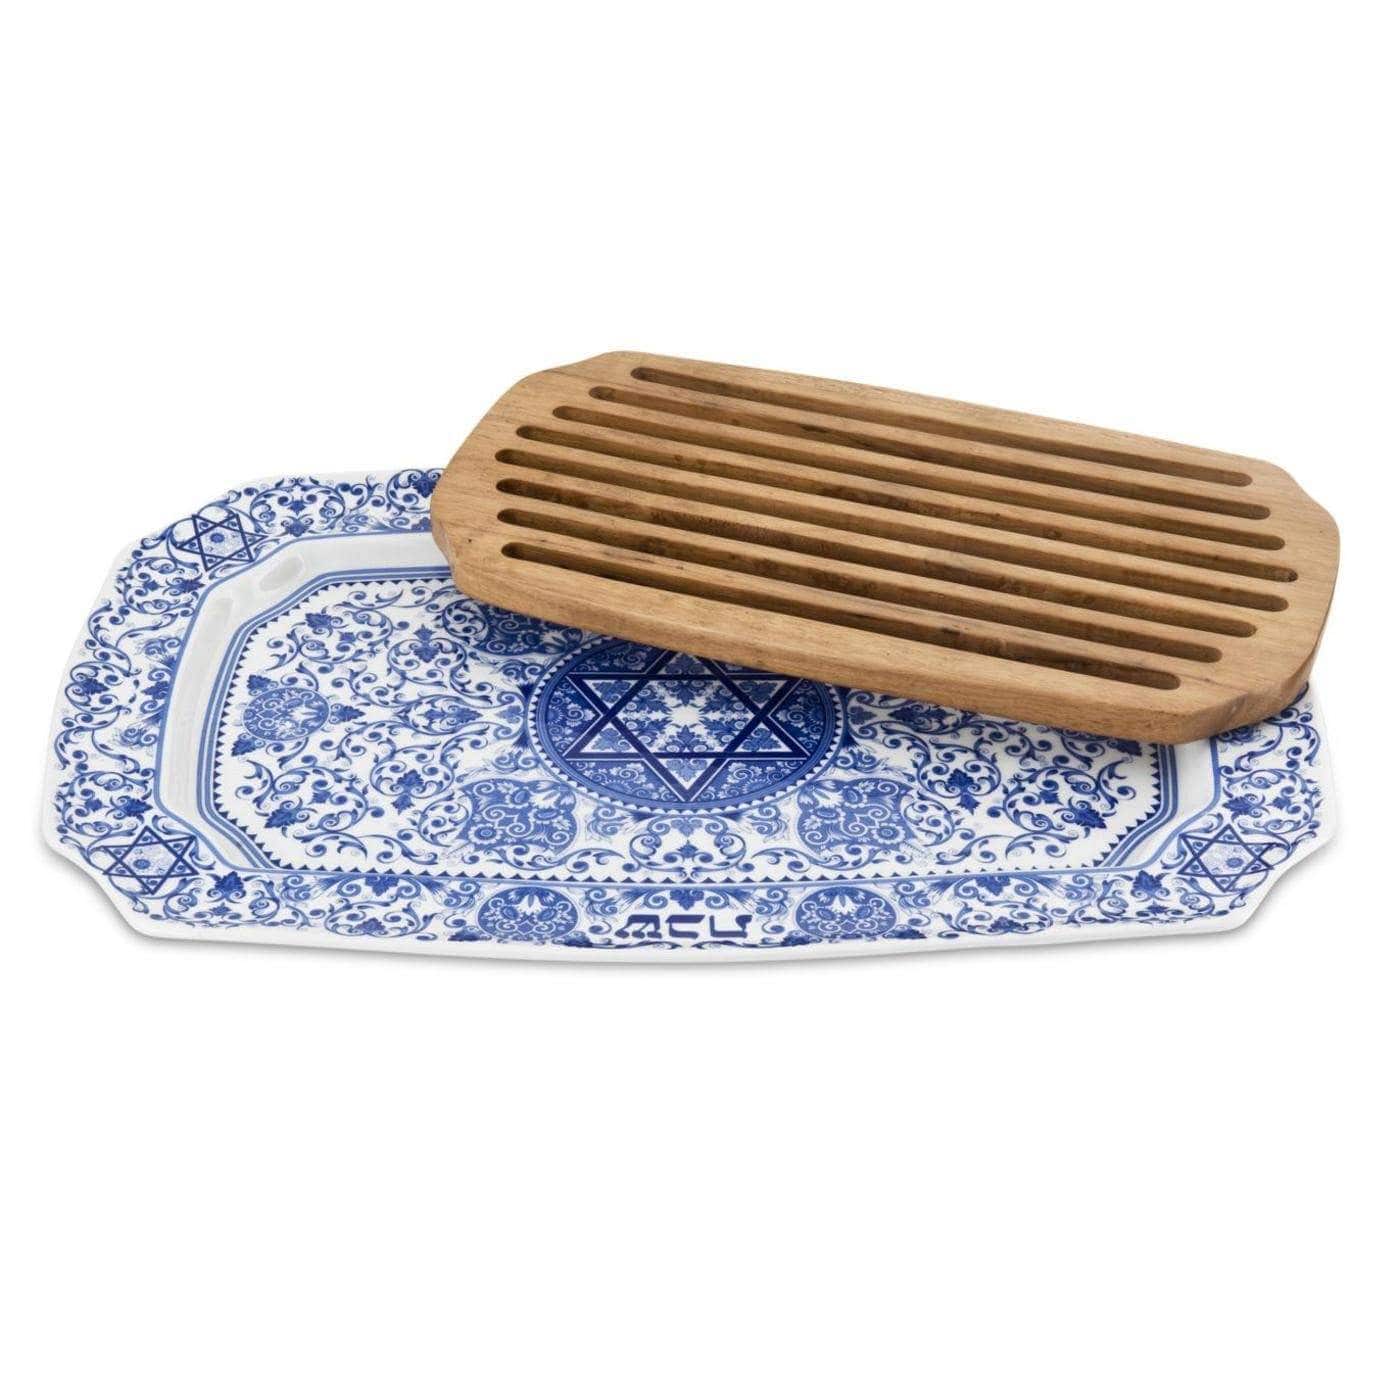 Spode Challah Accessories Spode Challah Board with Wood Insert